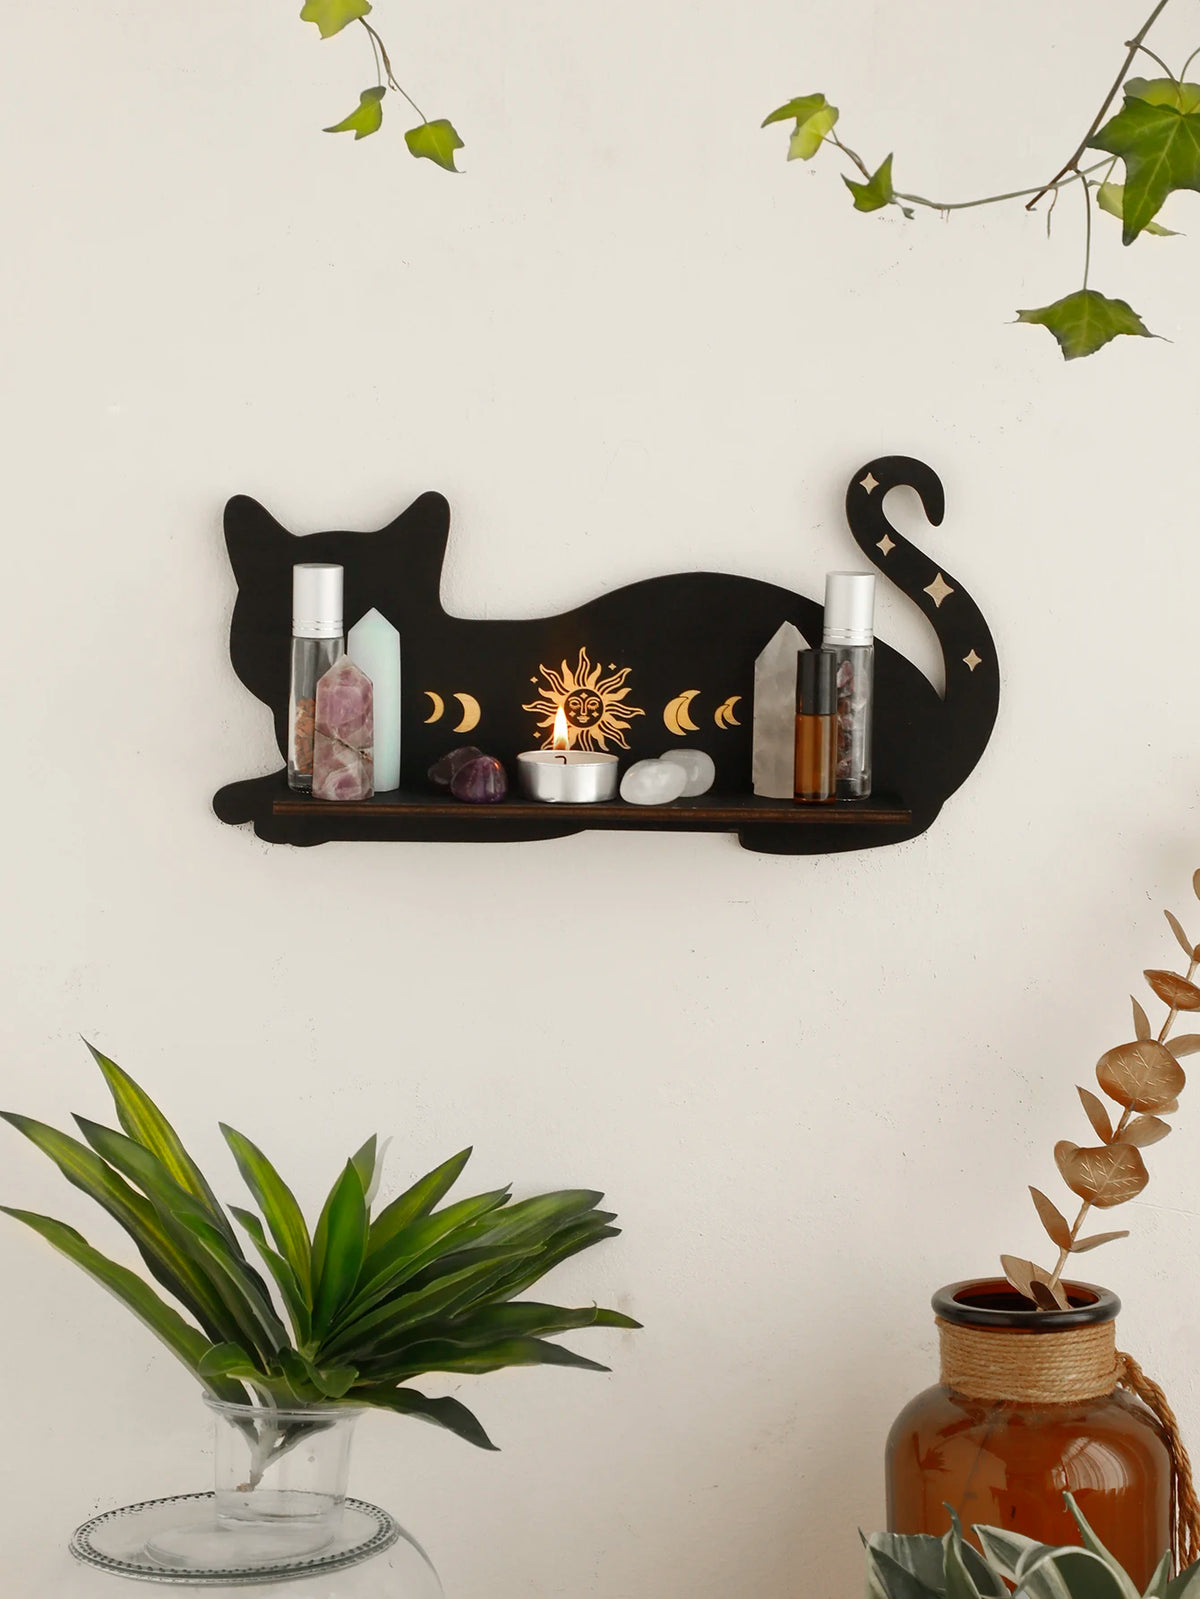 Black Cat Wooden Shelf - Moon Phase Chakra Crystal Display Stand, Gothic Witch Home Decor for Bedroom